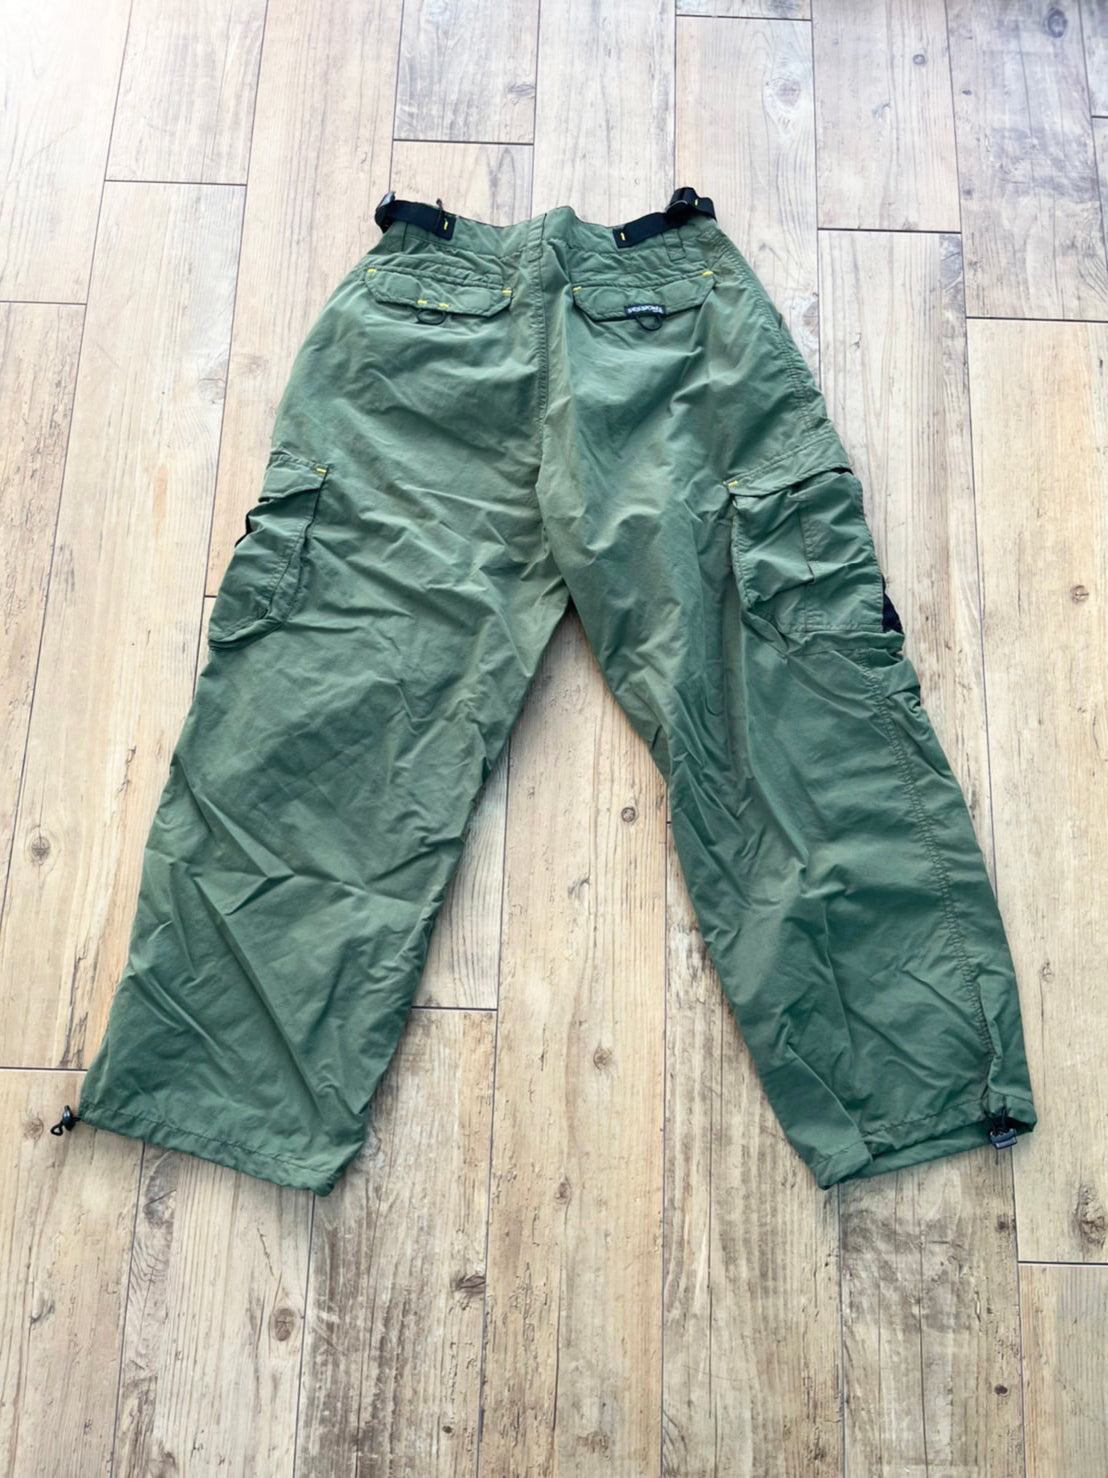 【Dead Stock】 90's sessions surf skate cargo pants (size:34inch)